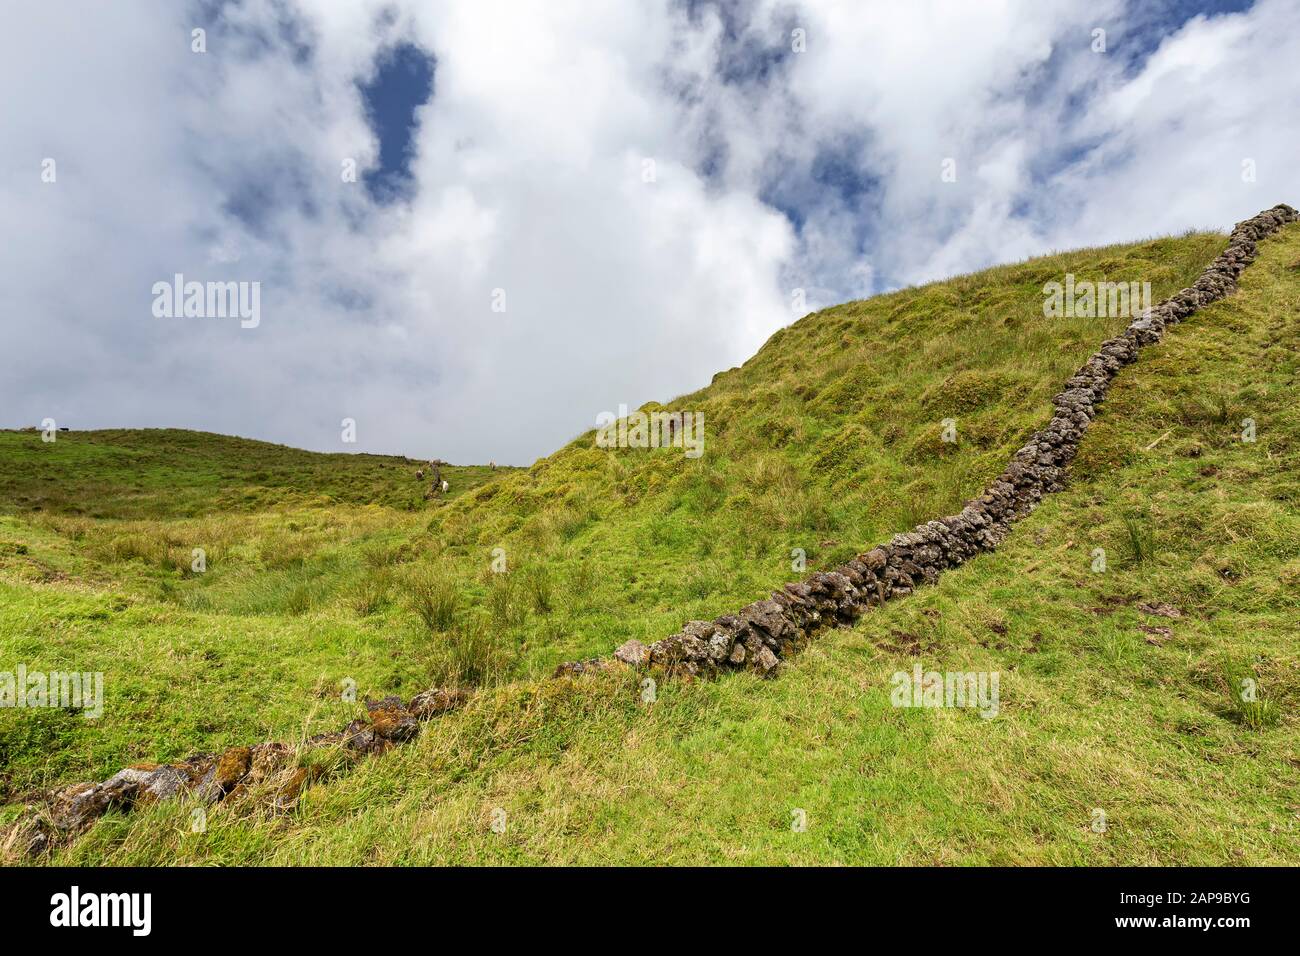 A man made rock wall on the hilly pastures on Pico island in the Azores, Portugal. Stock Photo